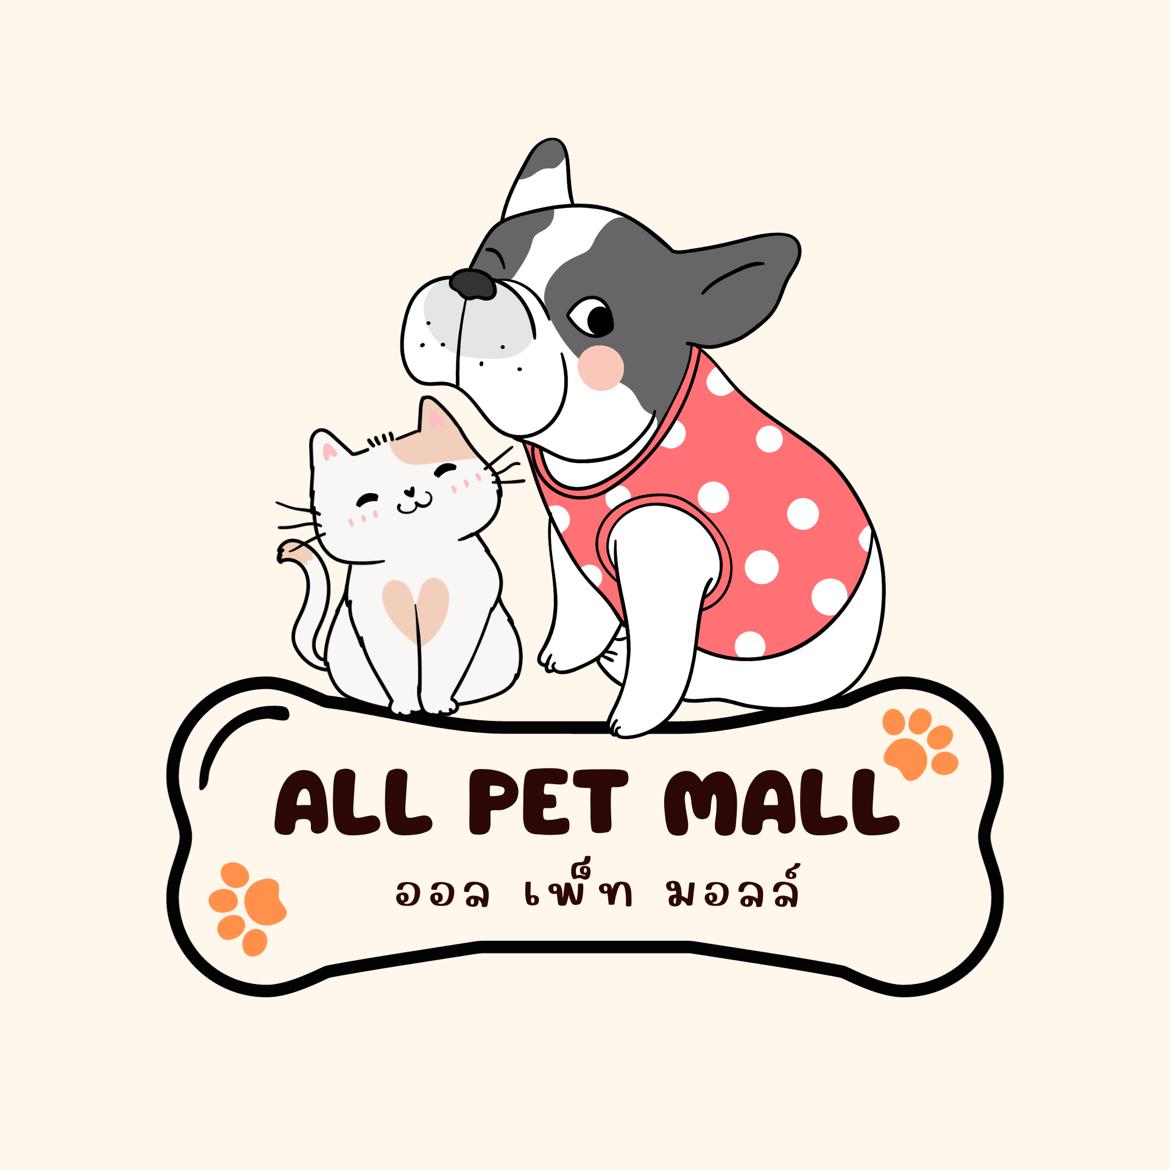 All Pet Mall